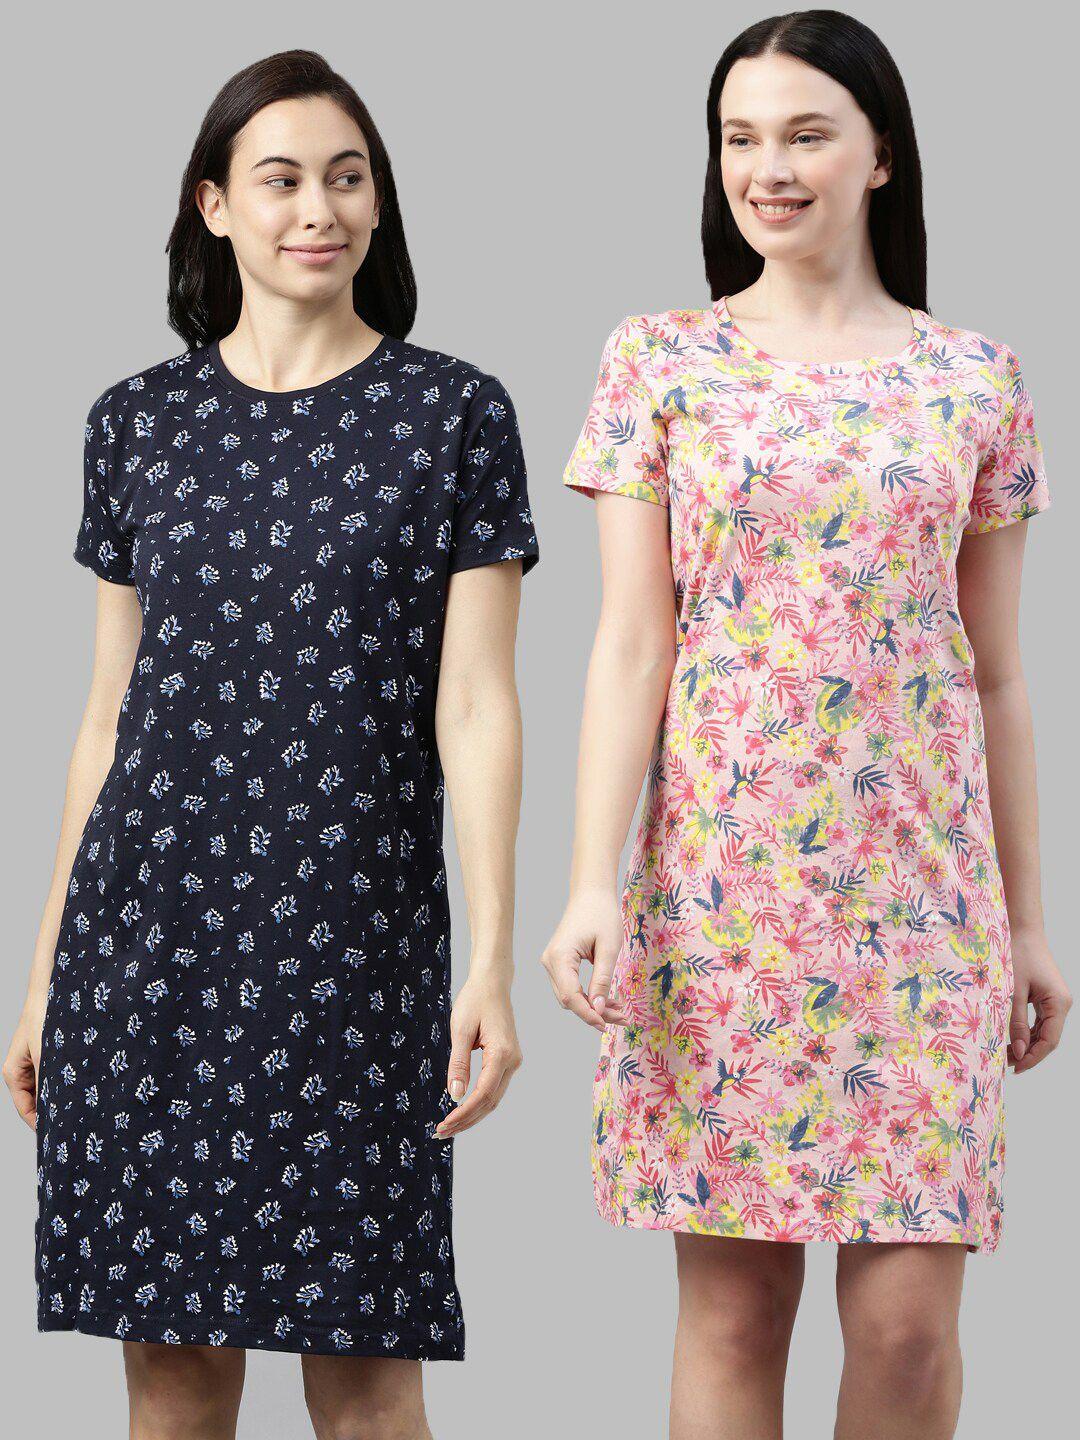 kryptic-pack-of-2-navy-blue-&-pink-printed-pure-cotton-nightdress